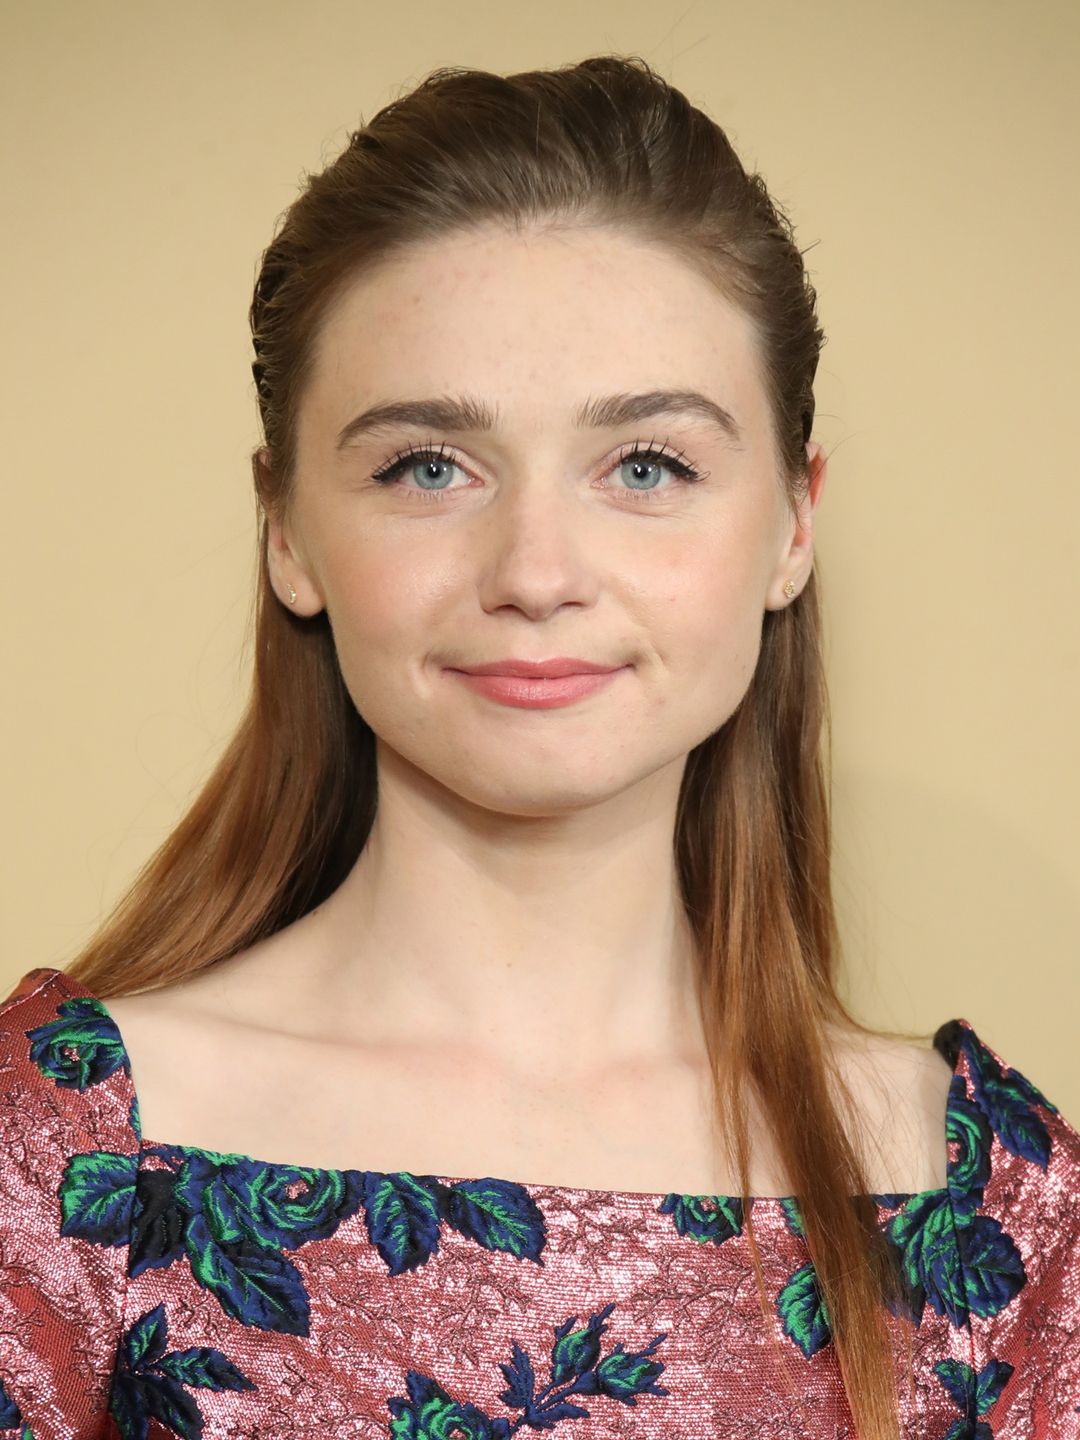 Jessica Barden unphotoshopped pictures